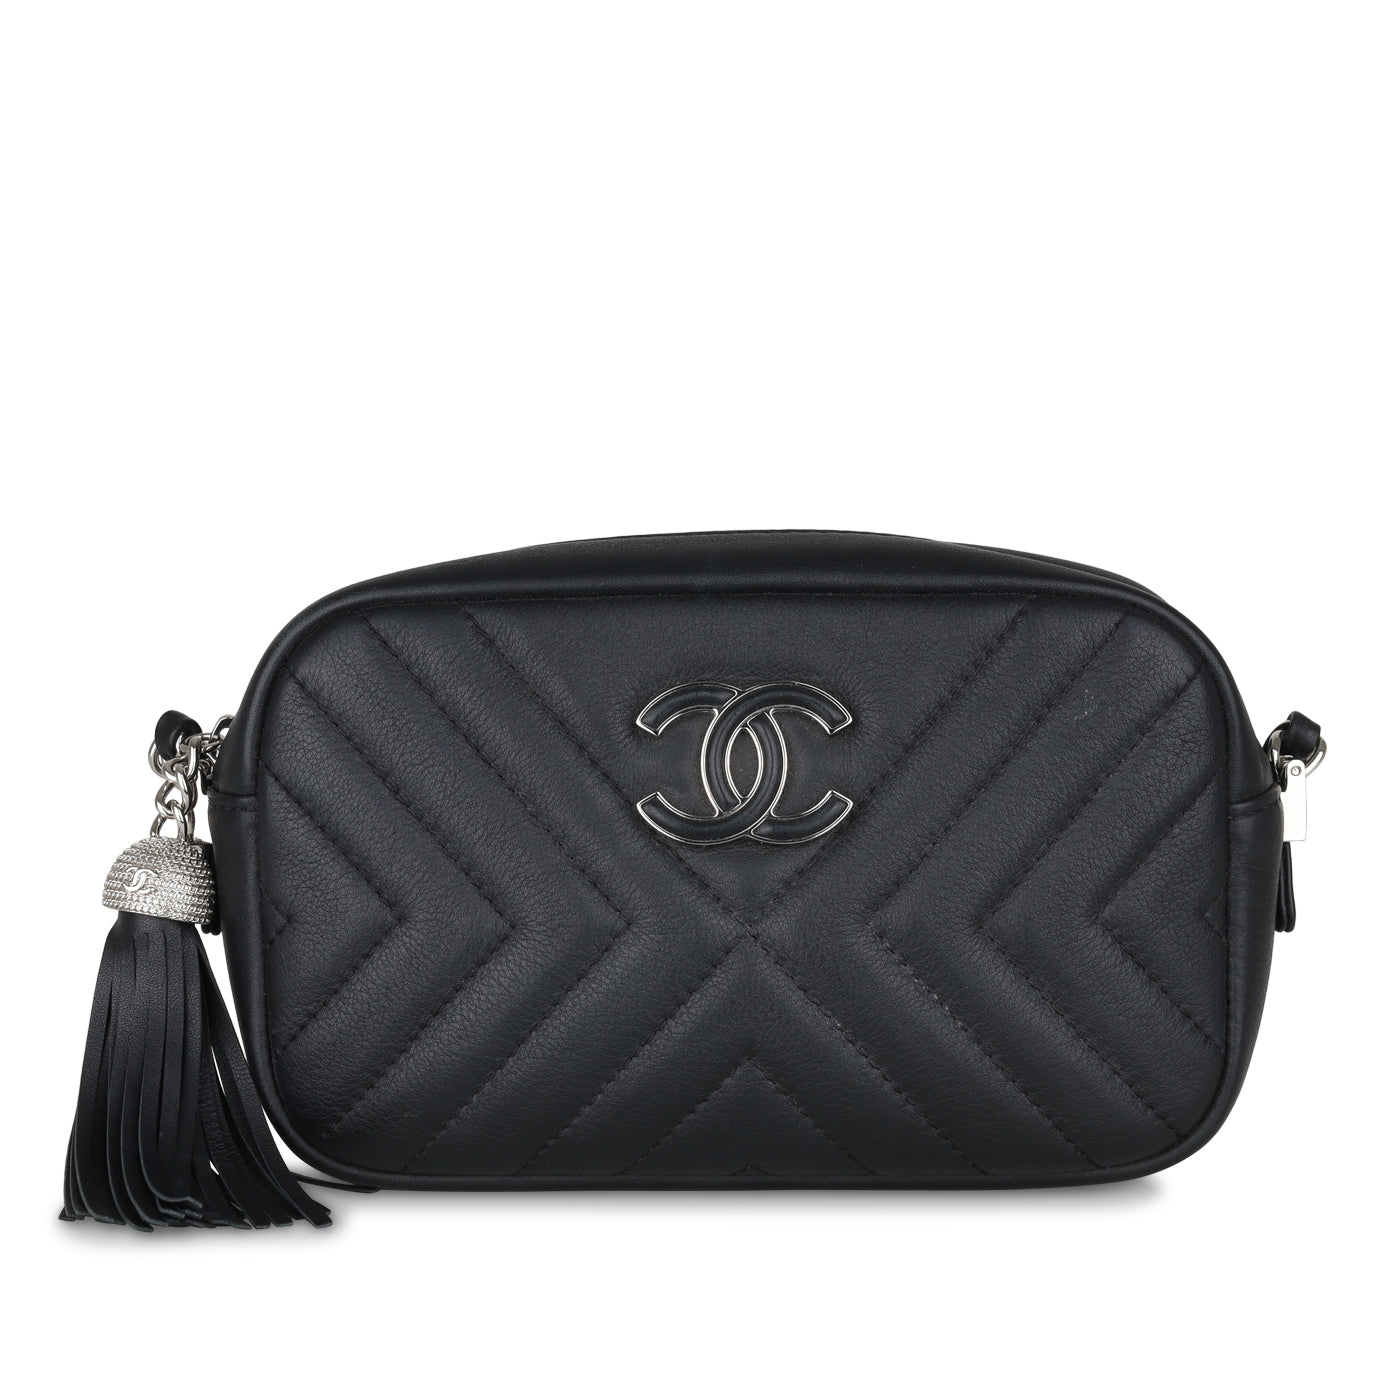 CHANEL CAMERA VINTAGE CHEVRON BAG, with top zip closure with charm